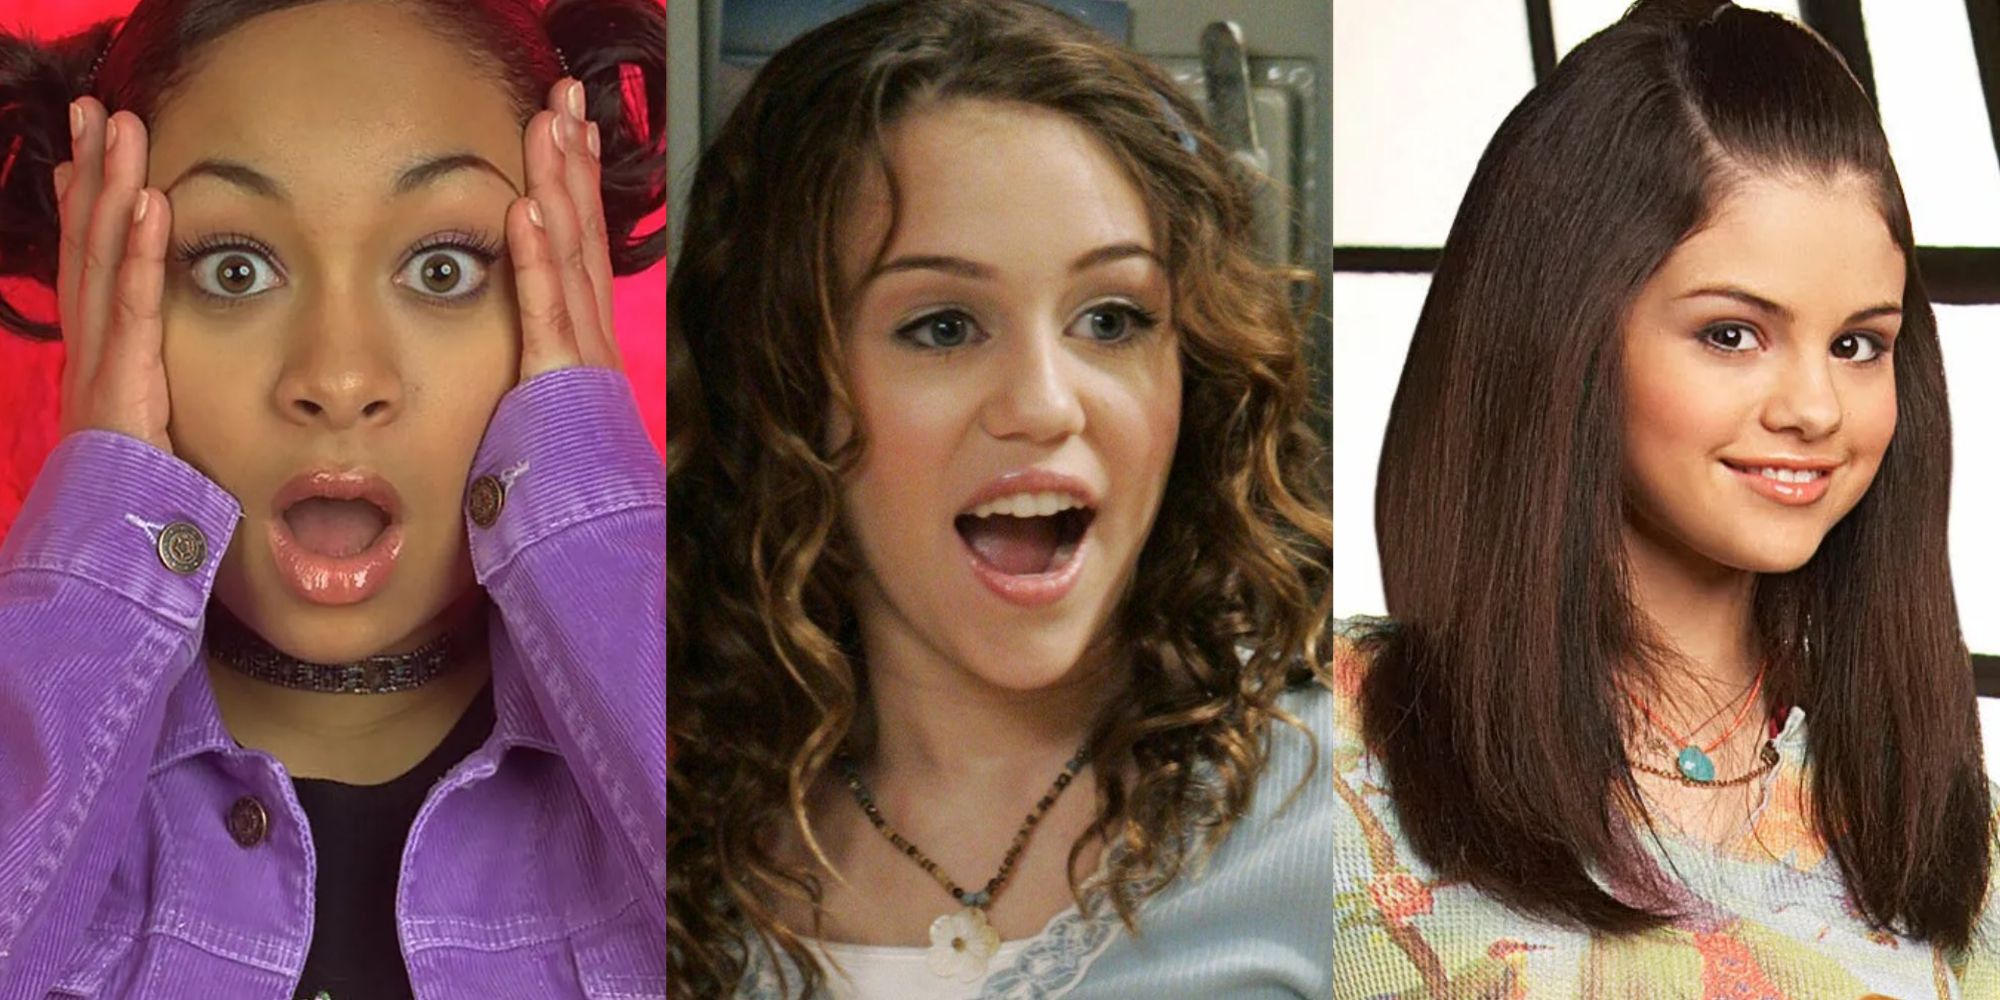 A split image of Raven Baxter, Hannah Montana, and Alex Russo looking toward the camera in That's so Raven, Hannah Montana, and Wizards of Waverly Place